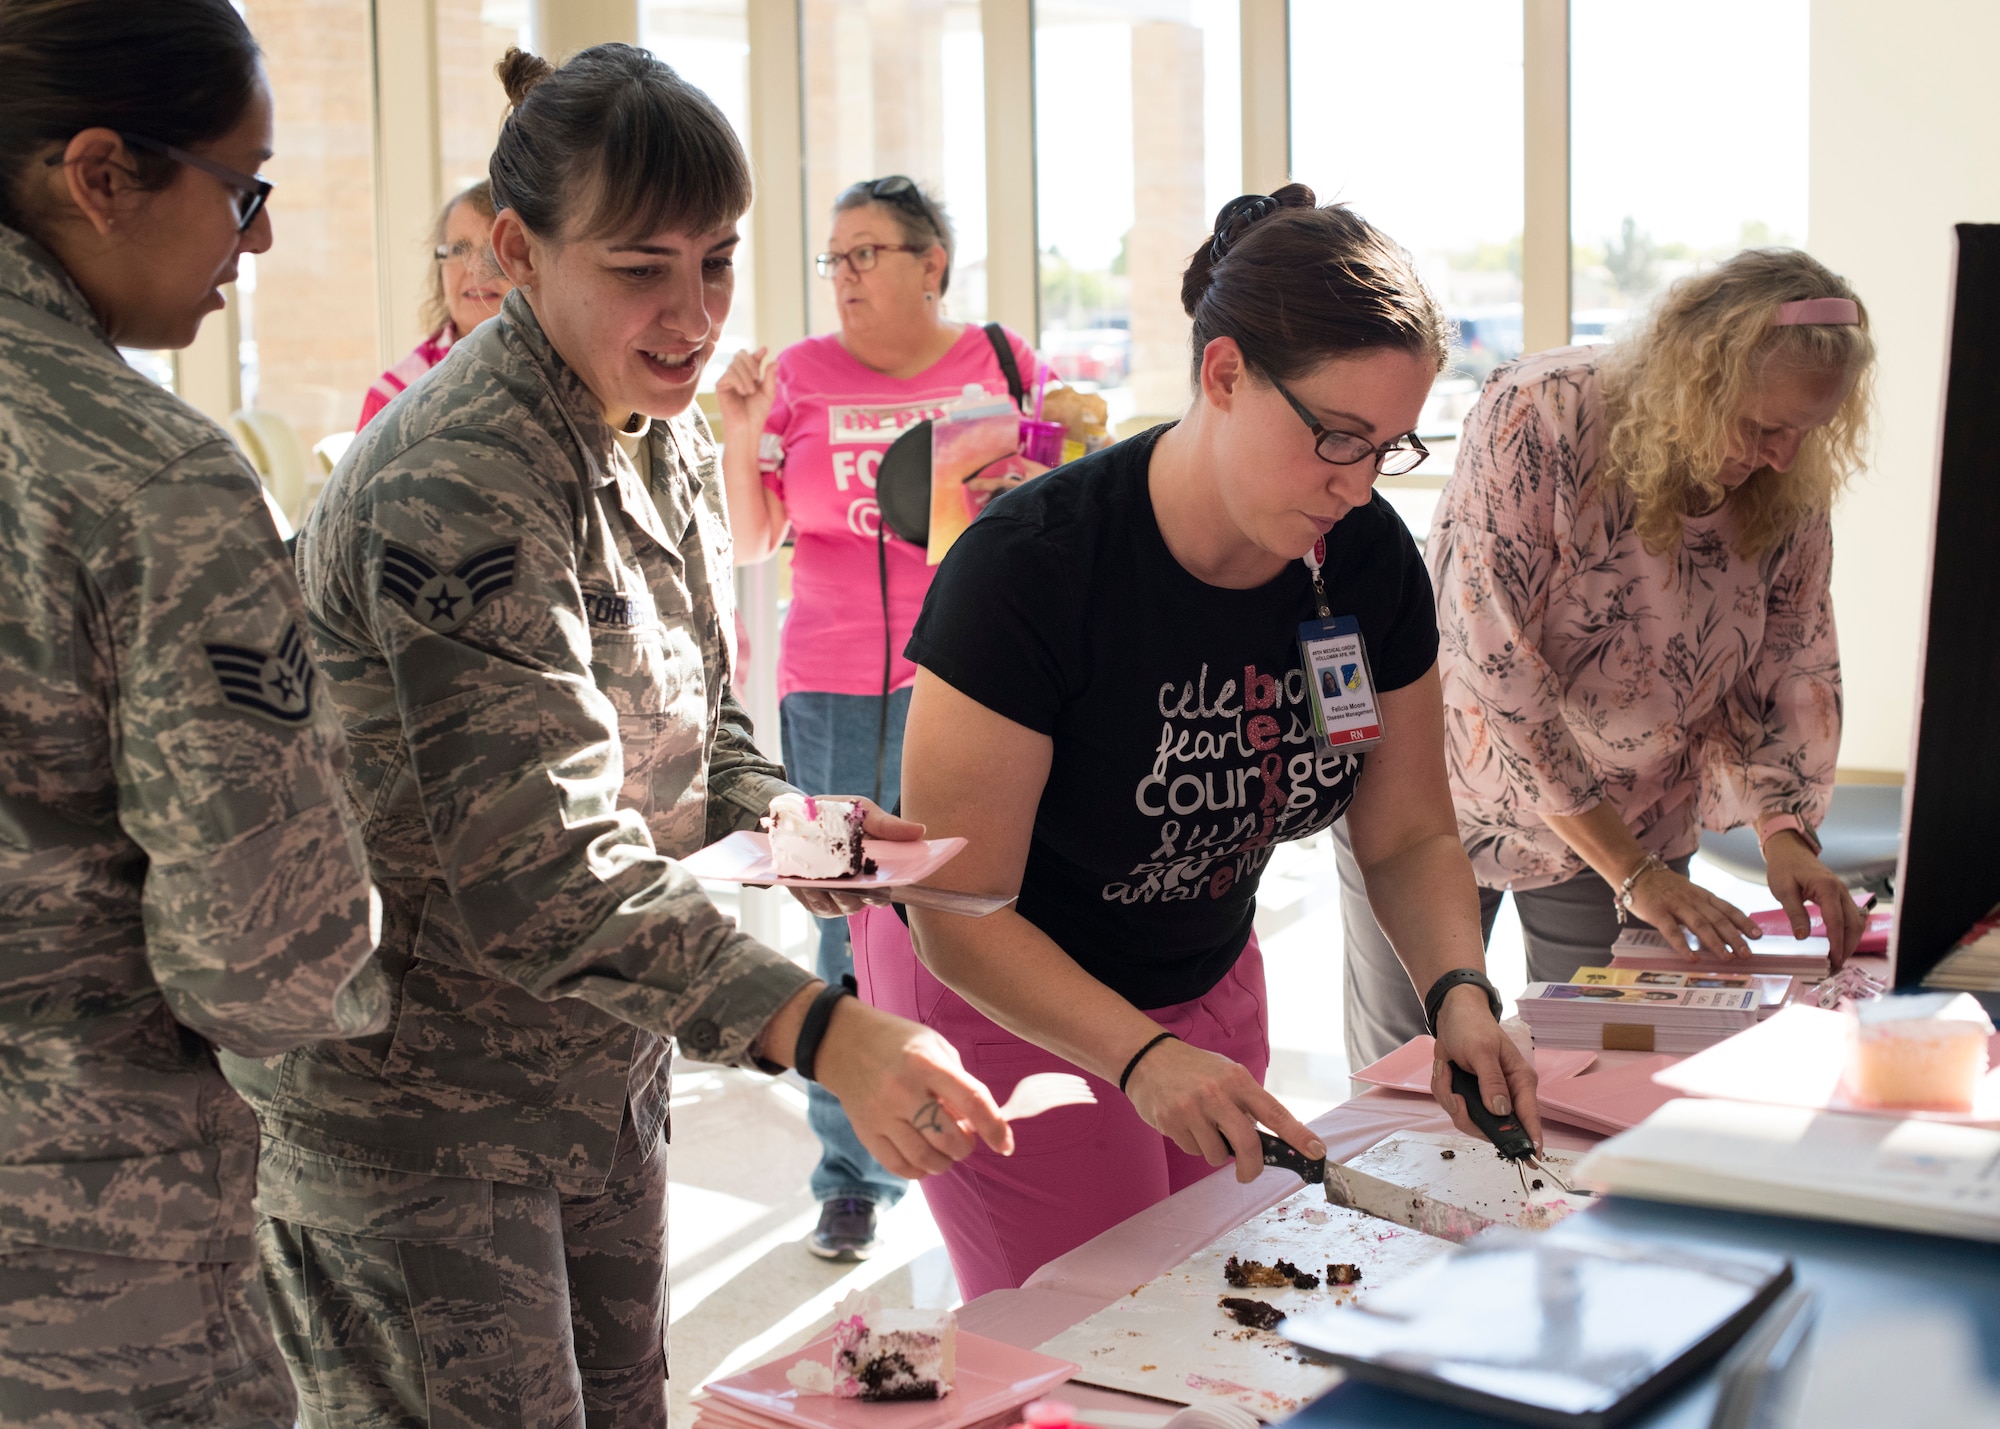 49th Medical Group staff serve cake during the 49 MDG’s Breast Cancer Awareness Month Celebration October 25, 2018, at Holloman Air Force Base, N.M. The event was organized to bring awareness to breast cancer, breast cancer risk factors, preventative measures and treatment options. (U.S. Air Force photo by Staff Sgt. BreeAnn Sachs)